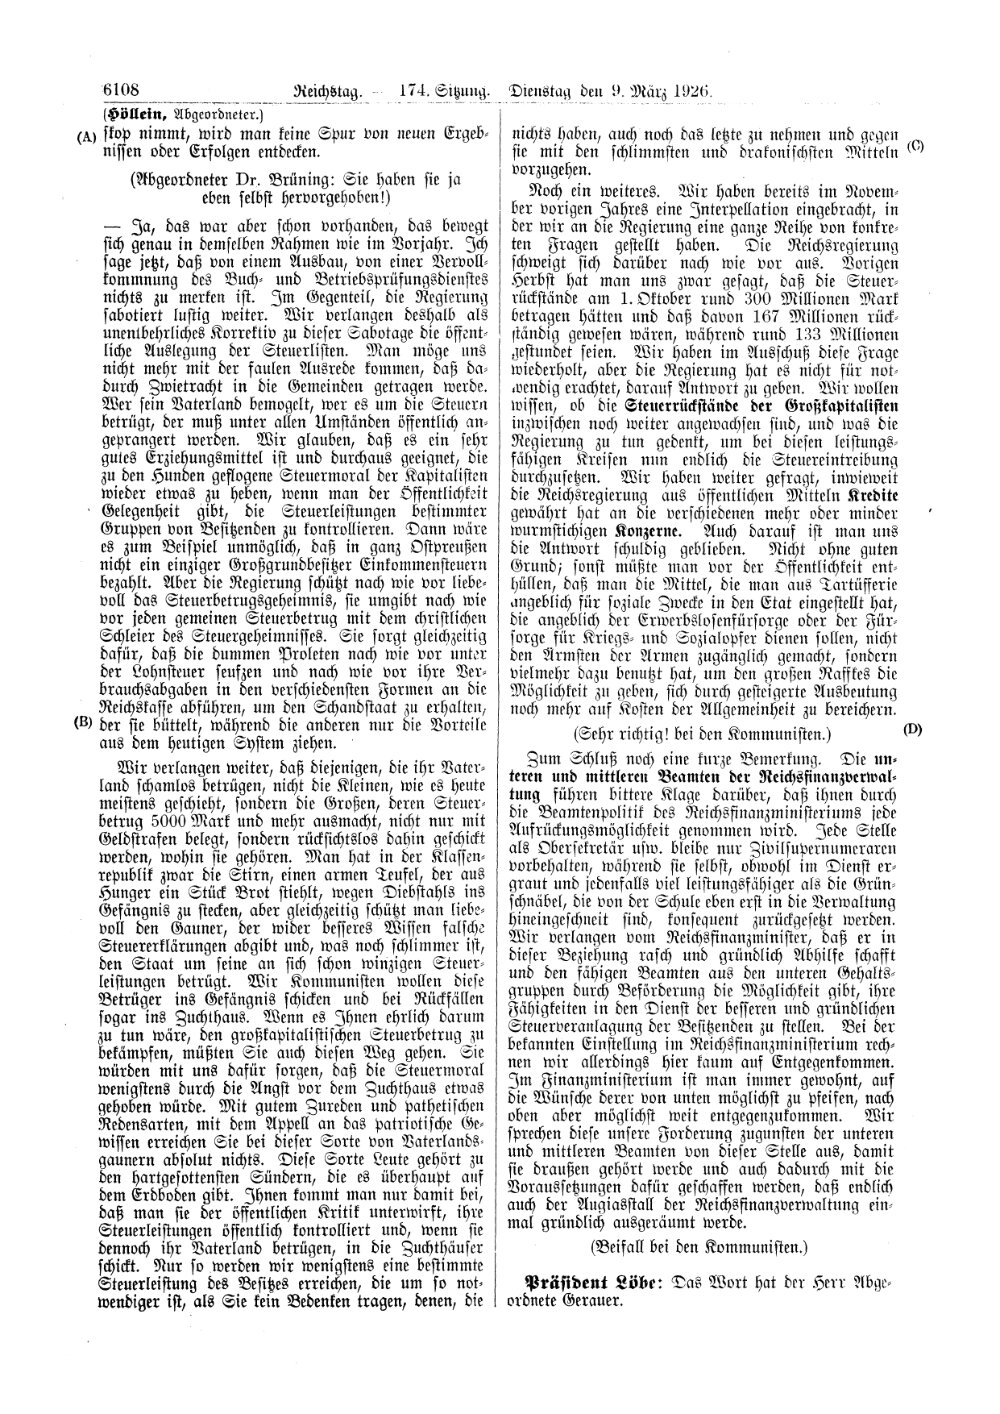 Scan of page 6108